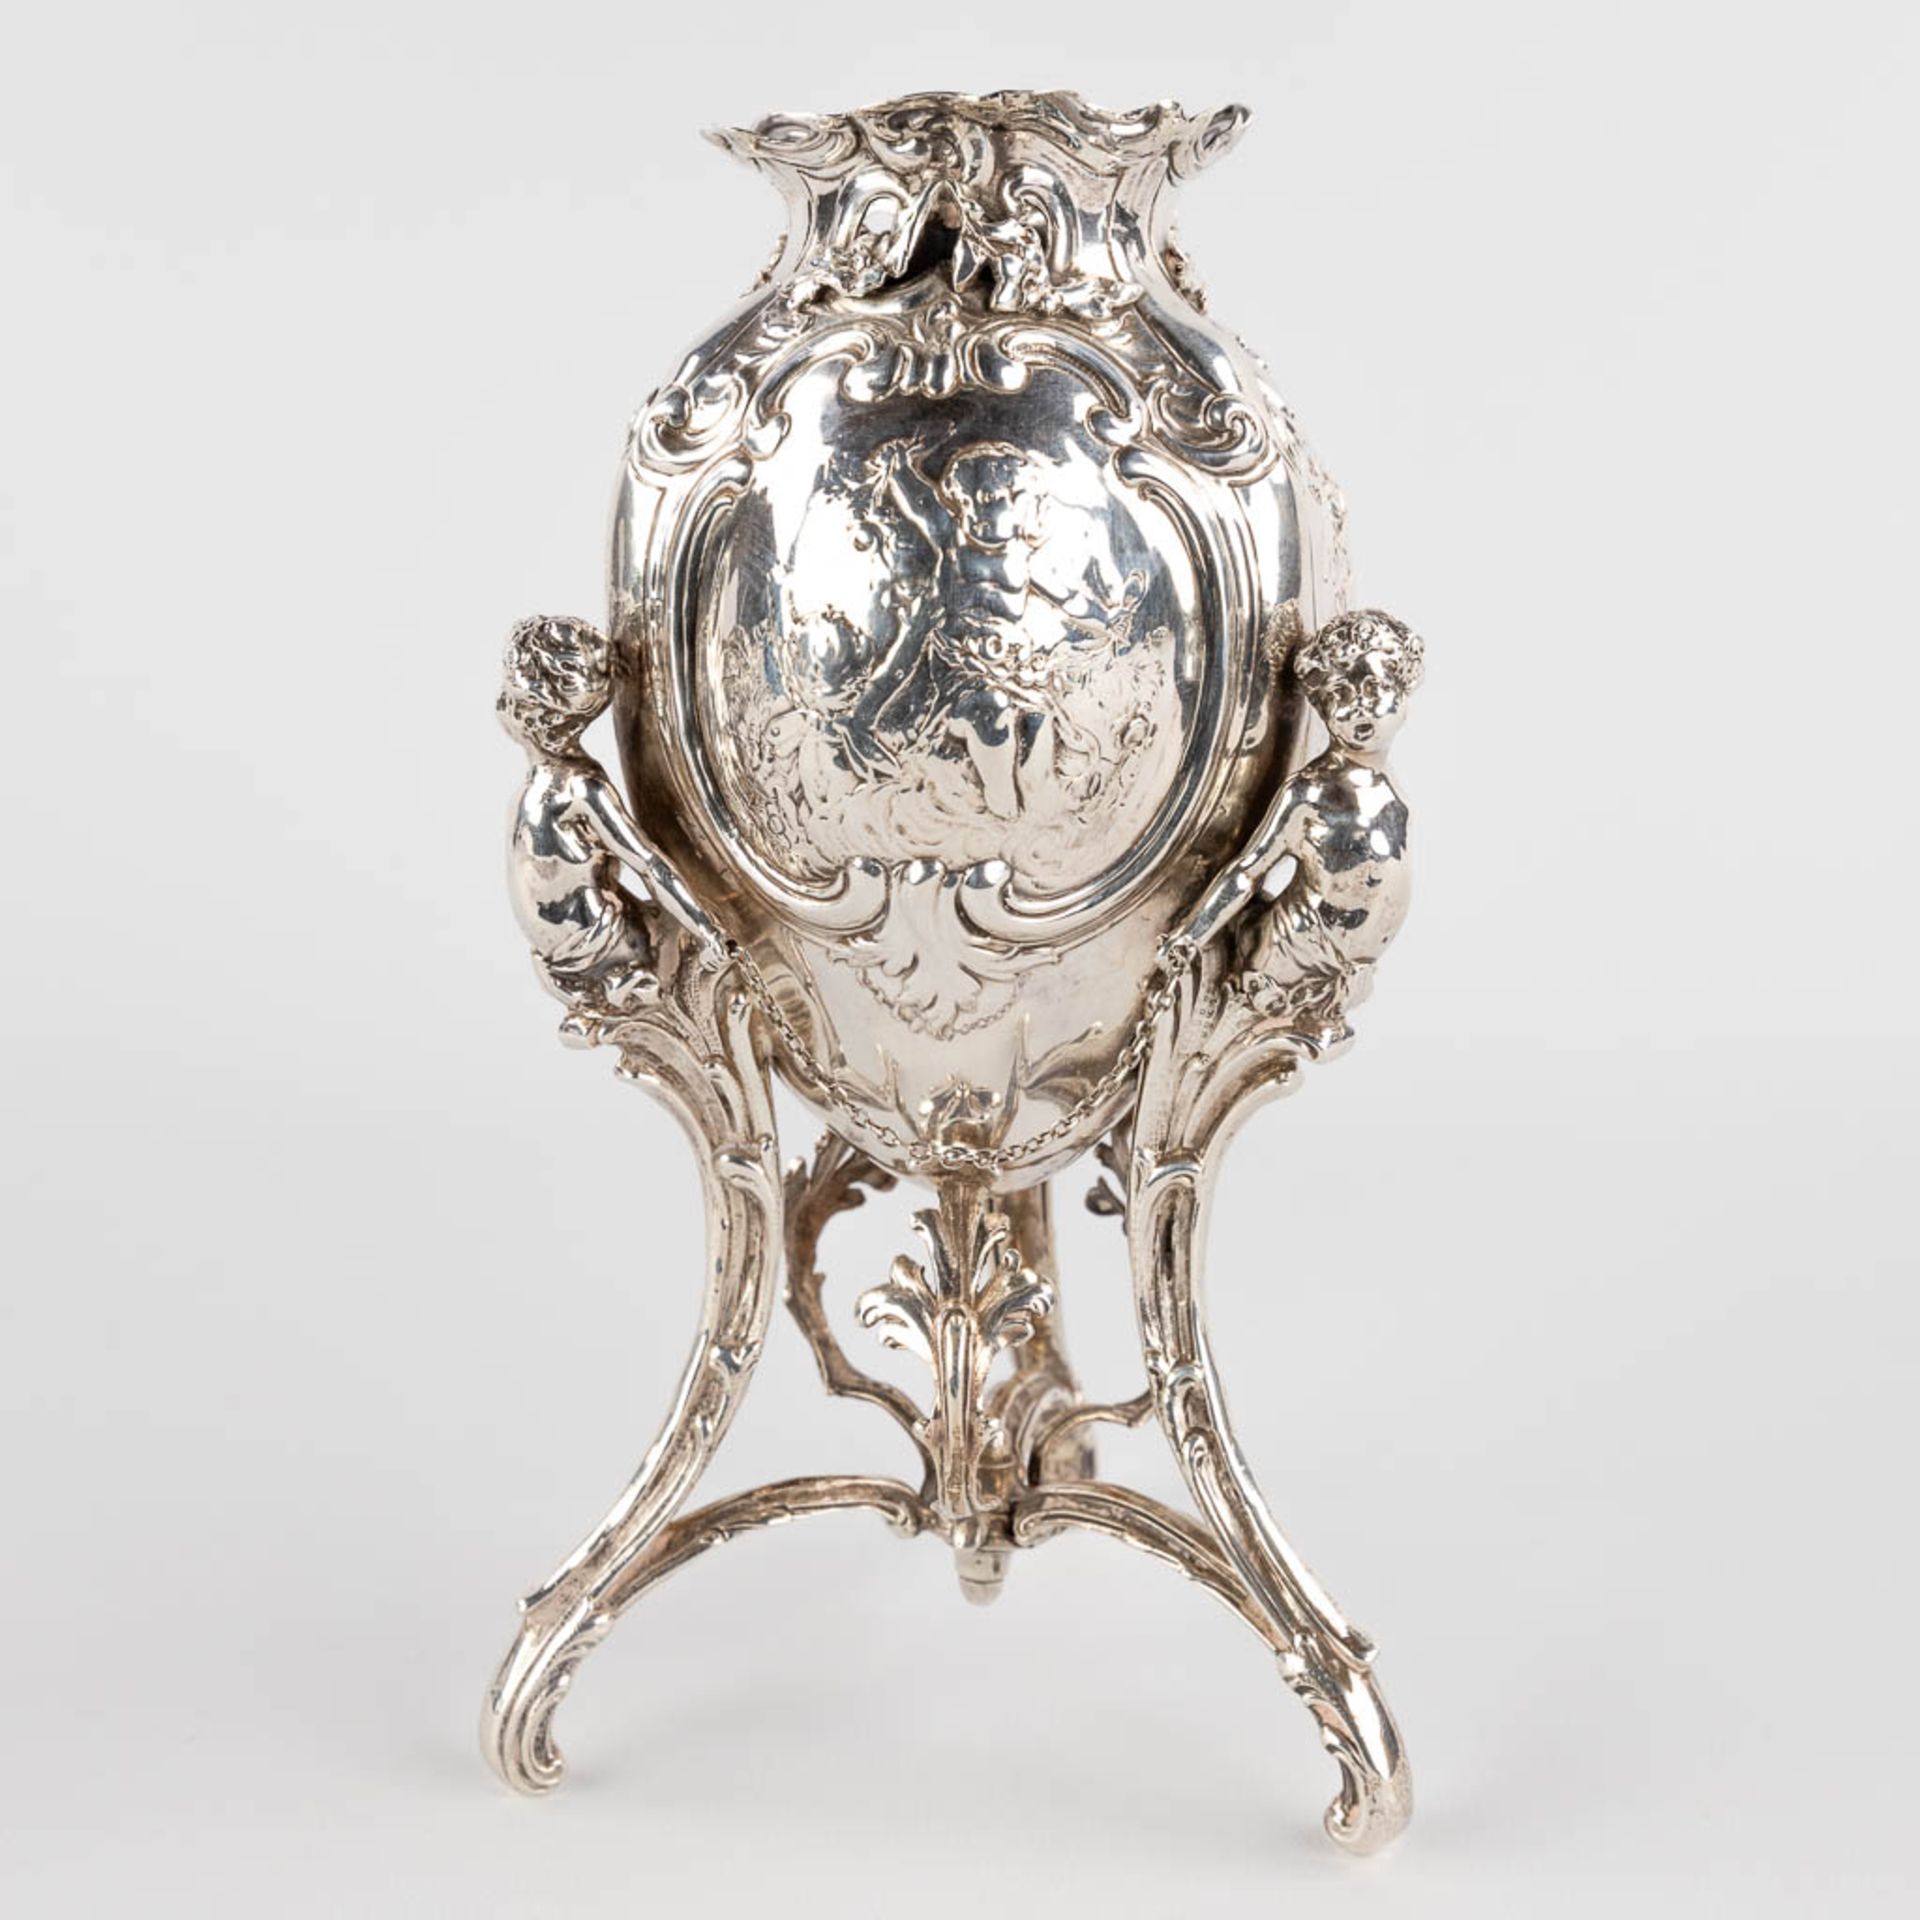 A fine vase, silver in Louis XV style, mounted with 3 putto. 427g. 1906. (D:11 x W:11 x H:20 cm) - Image 4 of 12